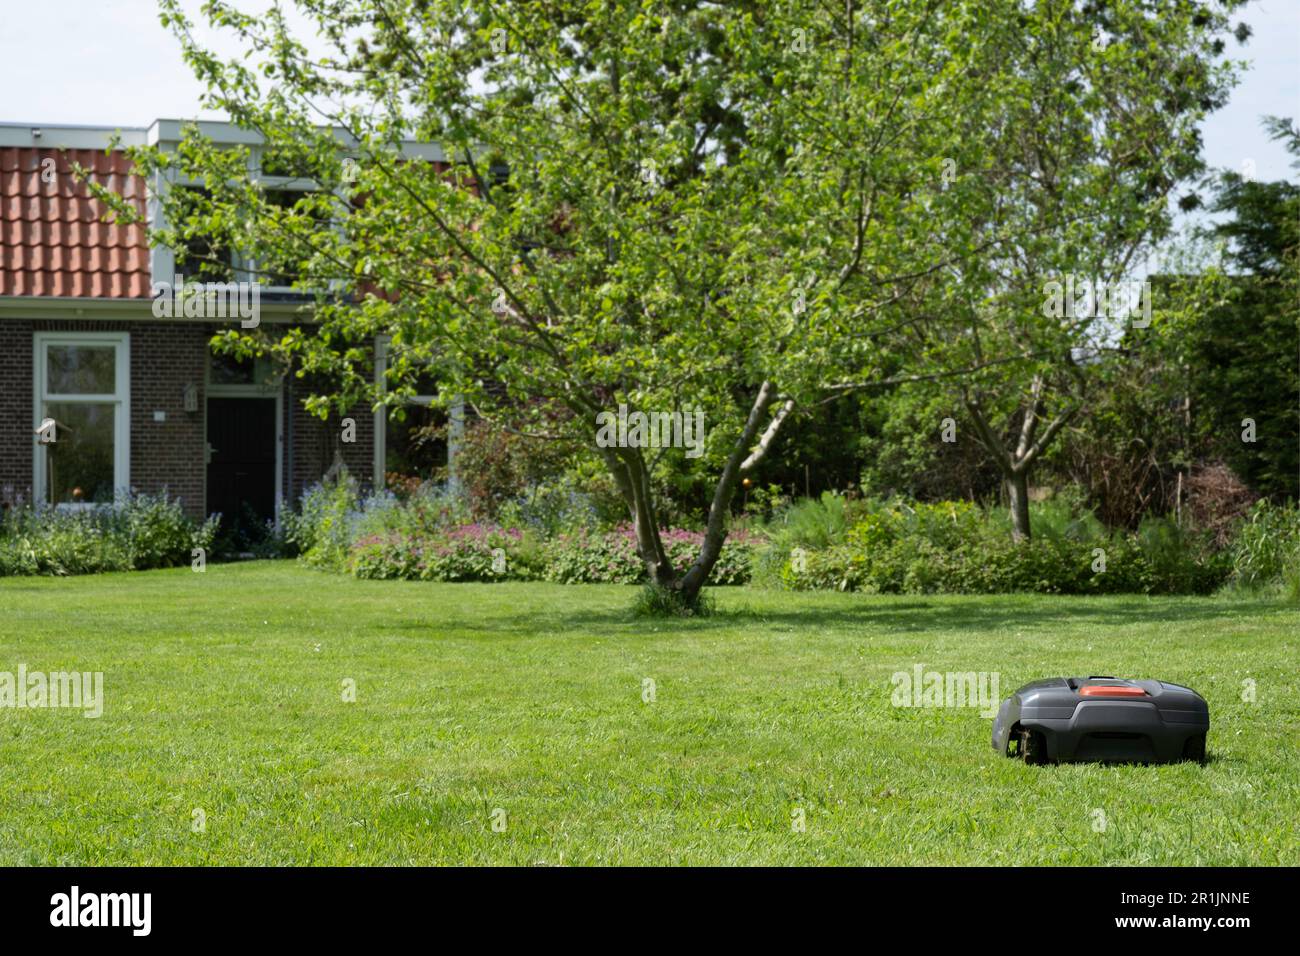 Robotic mower mows the lawn in front of a house in the Netherlands. Focus on the machine Stock Photo